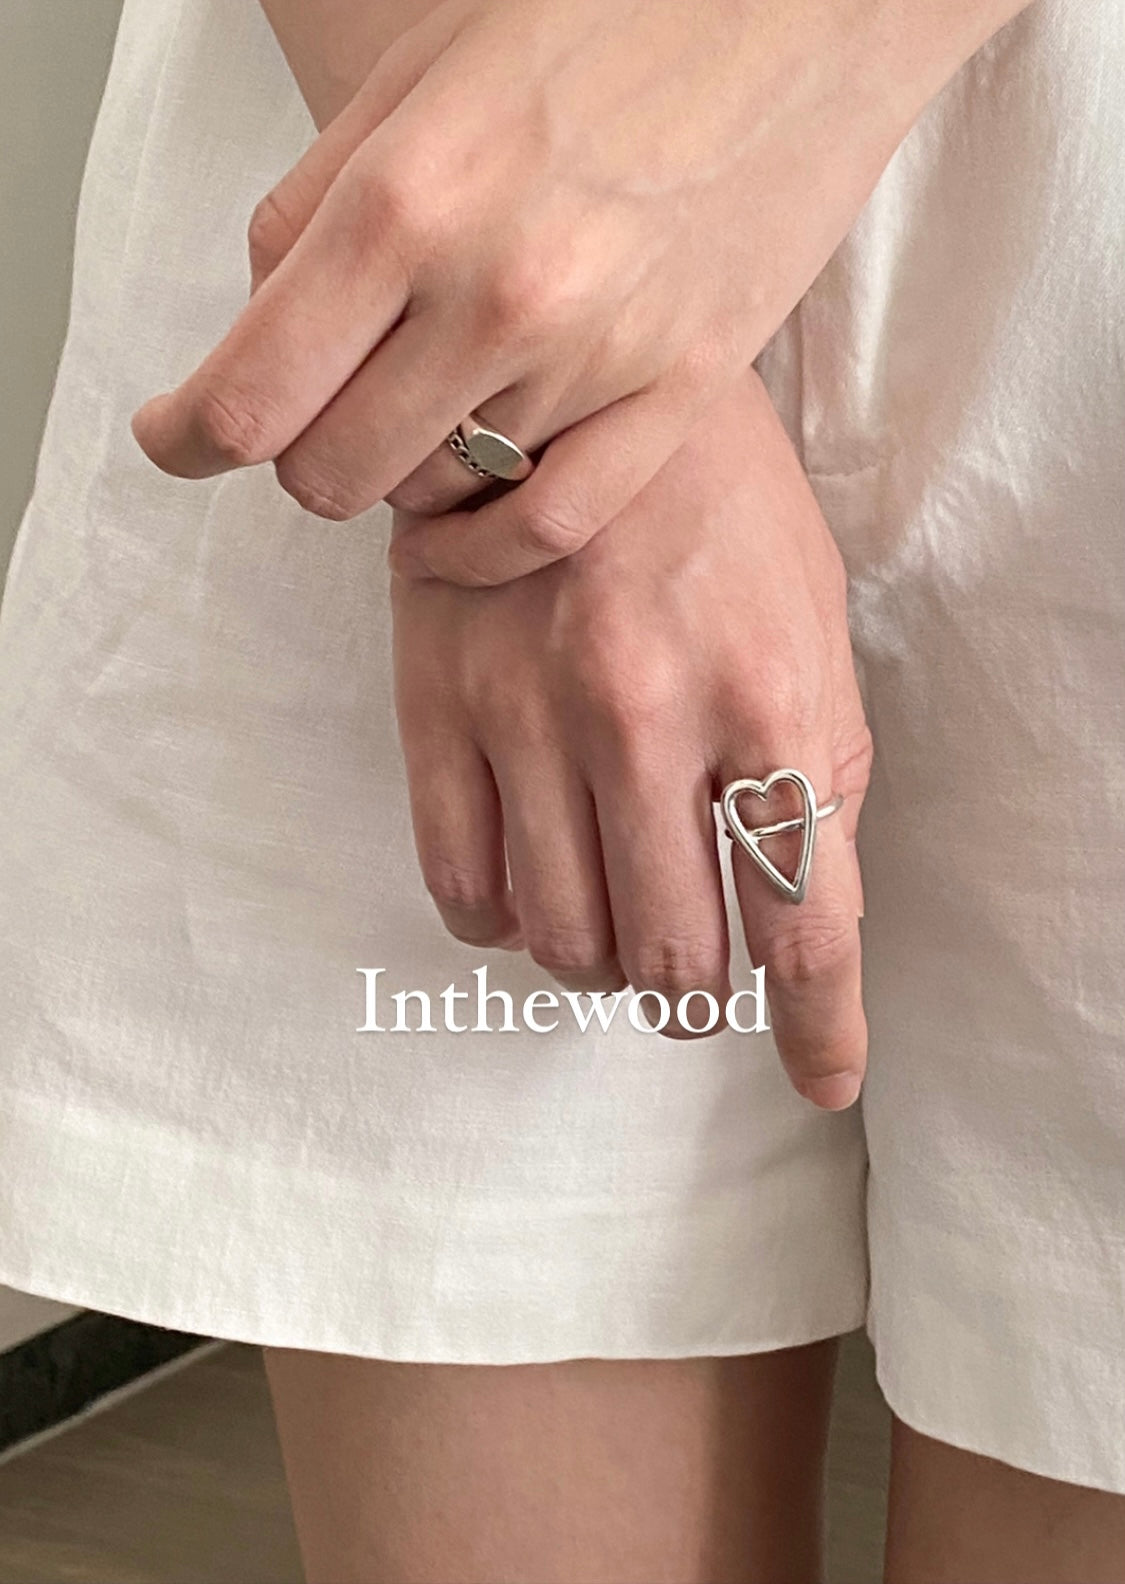 [925silver] Oh Heart Ring